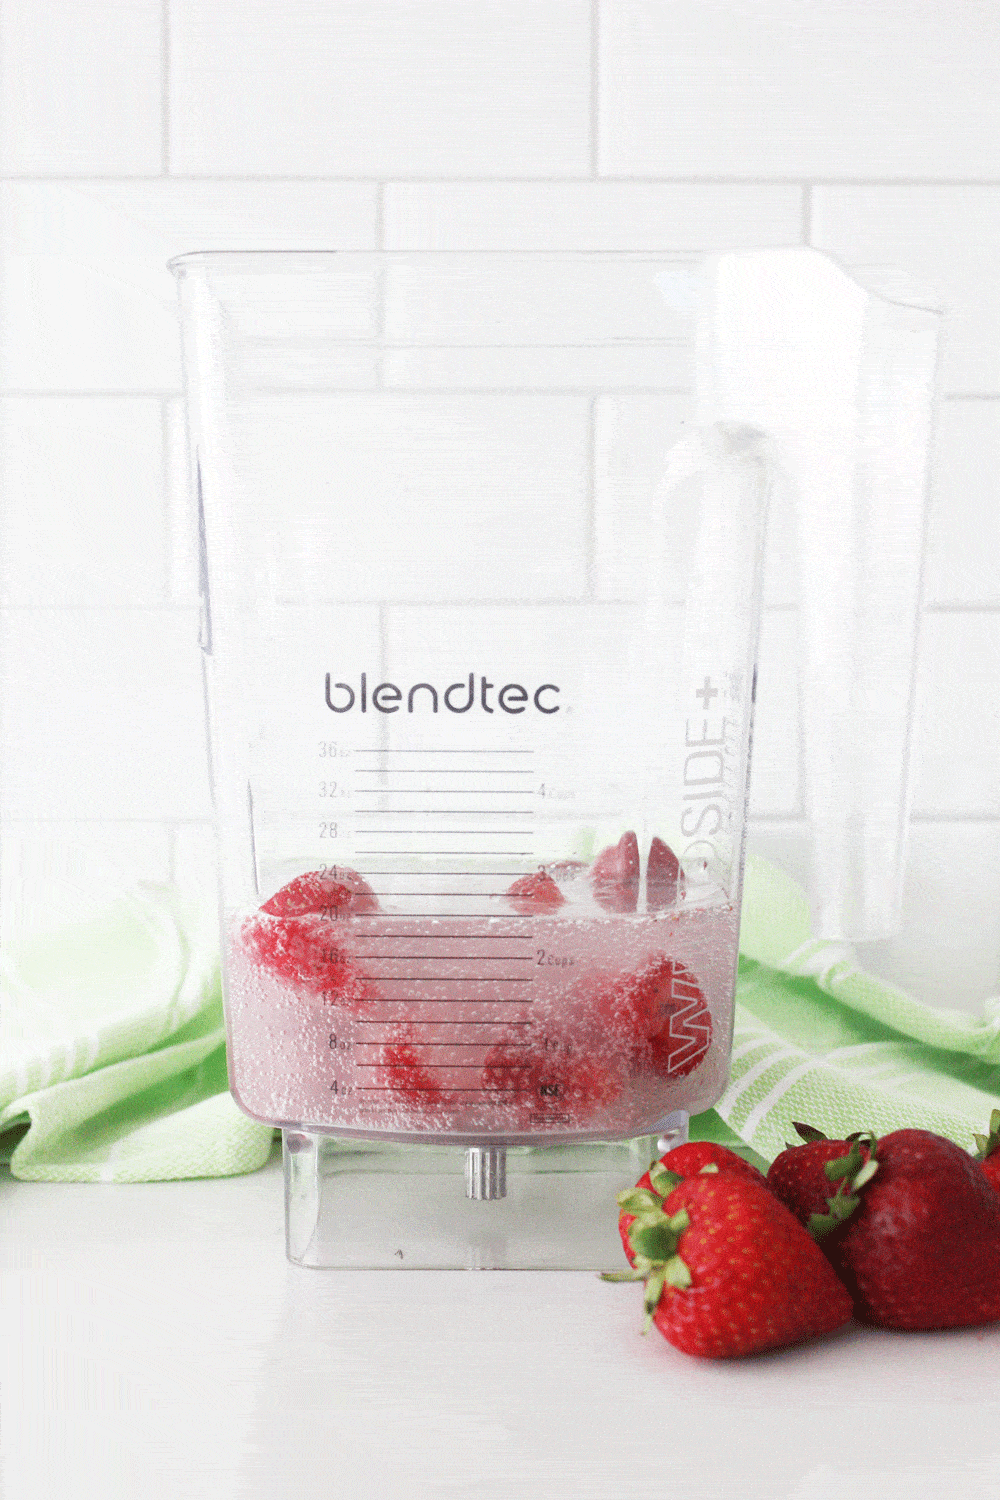 strawberries and fresca in a blendtec